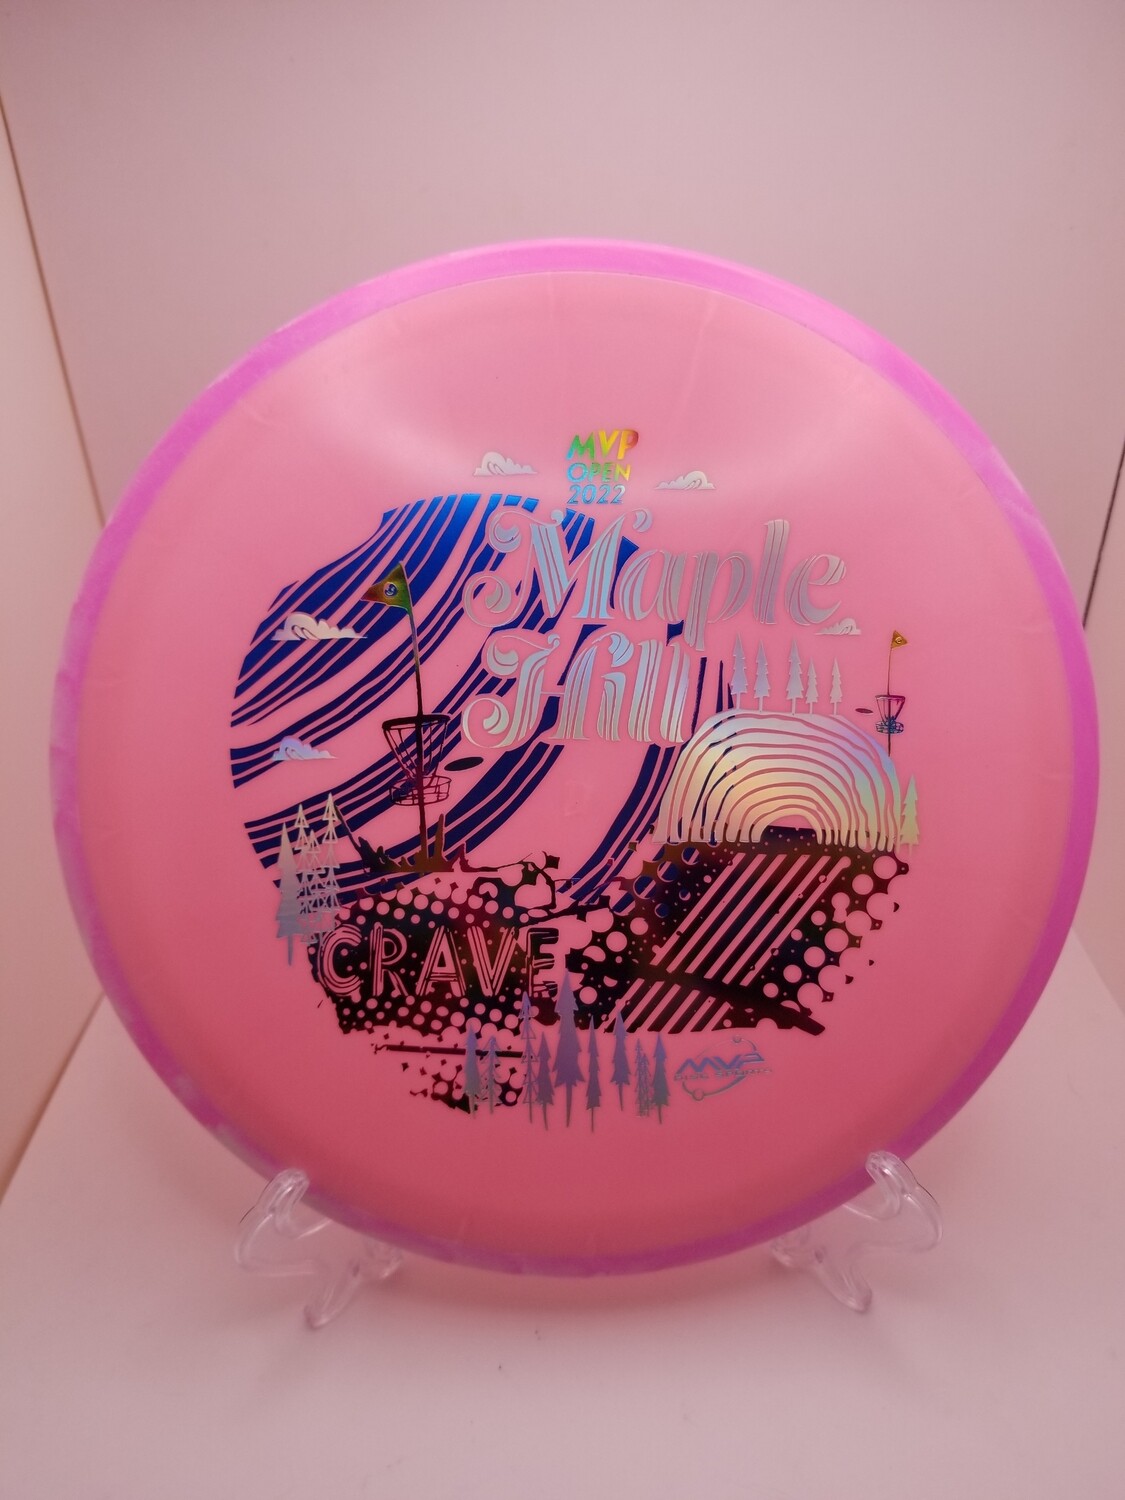 Axiom Discs Fission Crave MVP Open 2022 Maple Hill DGC Special Edition fairway driver Pink Plate with Pink/white Swirly Rim 174g